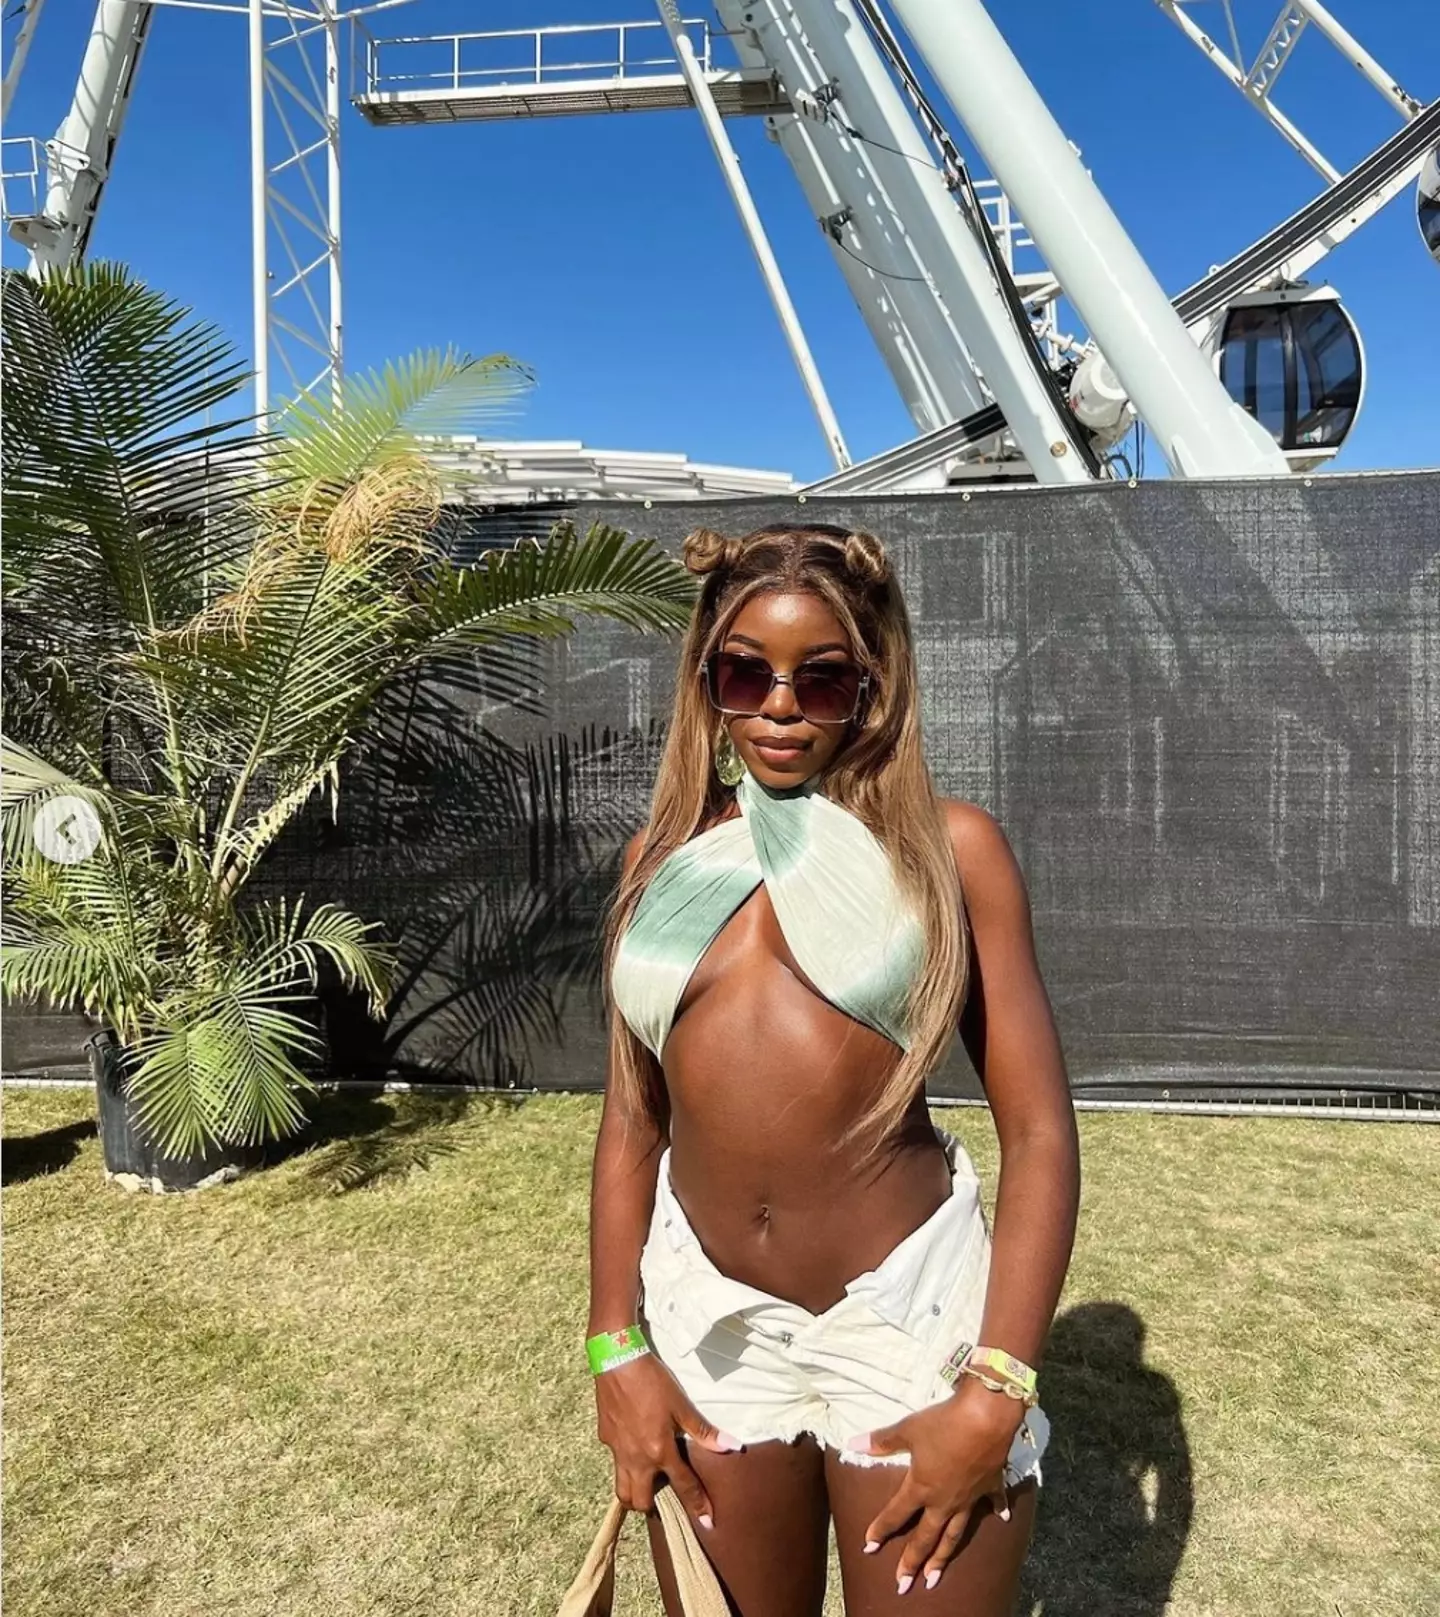 Kaz Kamwi was also seen rocking the tummy-baring trend in California over the weekend (Instagram @kazkamwi).